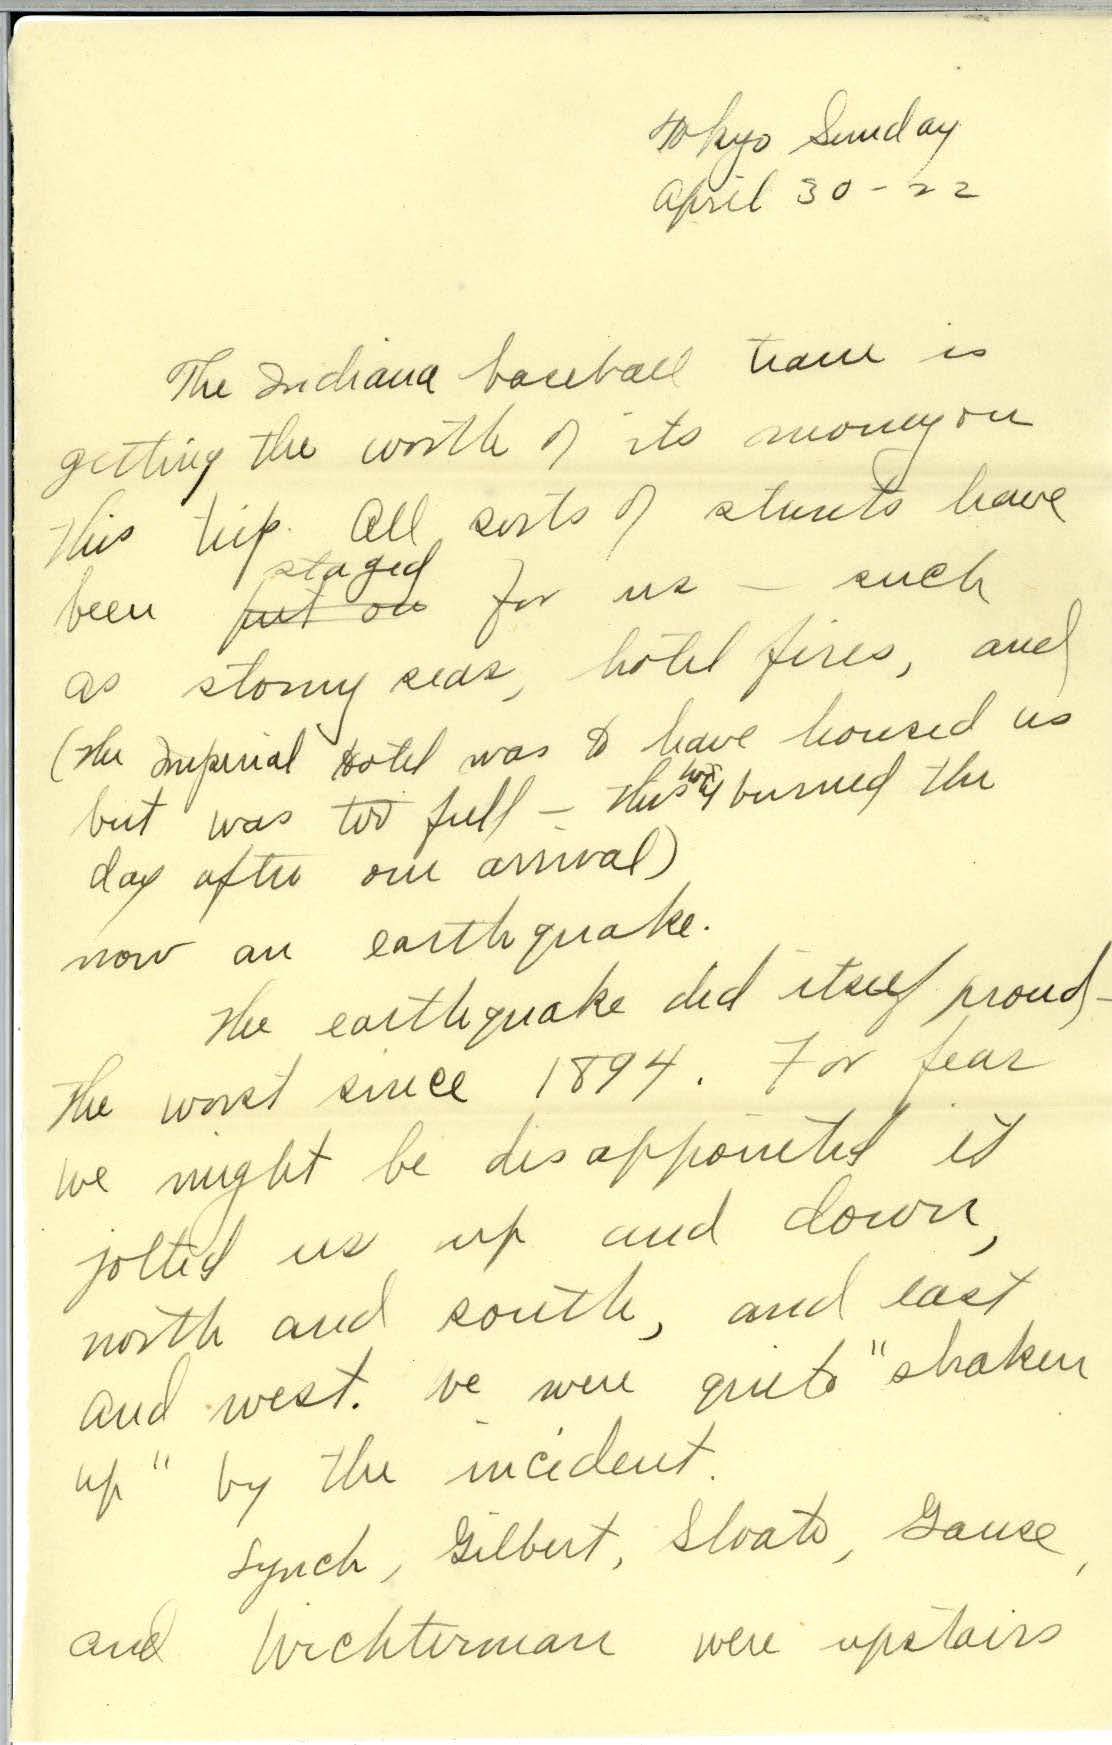 Scan of page 1 of Edna Hatfield's April 30, 1922 letter to Frank R. Elliot - written in cursive handwriting. 